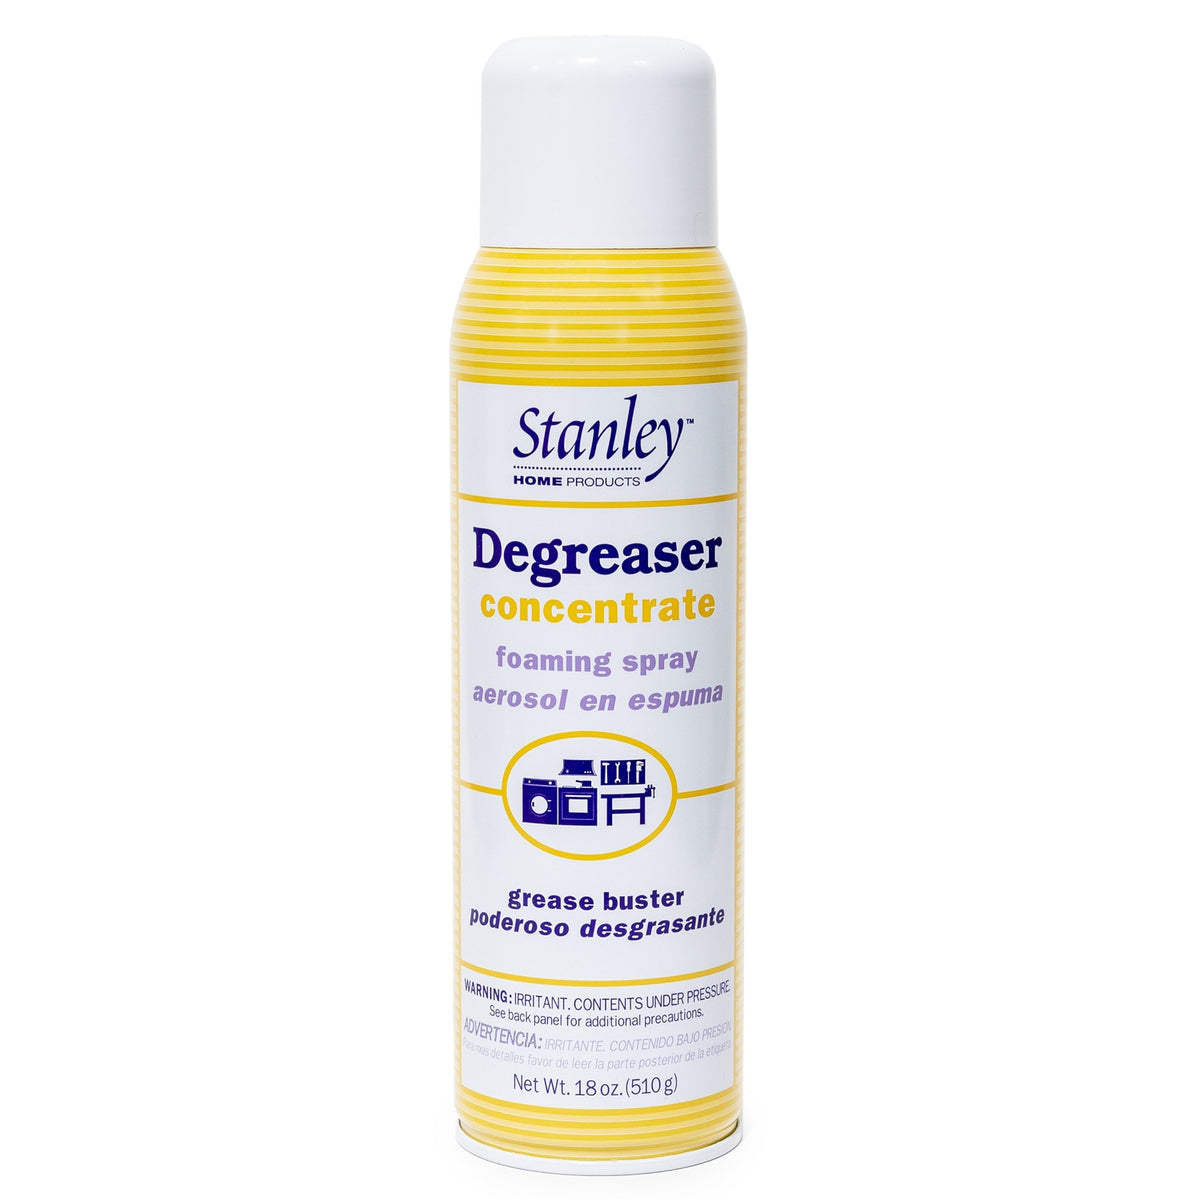 DEGREASER/ SUN SPRAY Ready-to-use Foaming Degreaser Cleaner, Quart